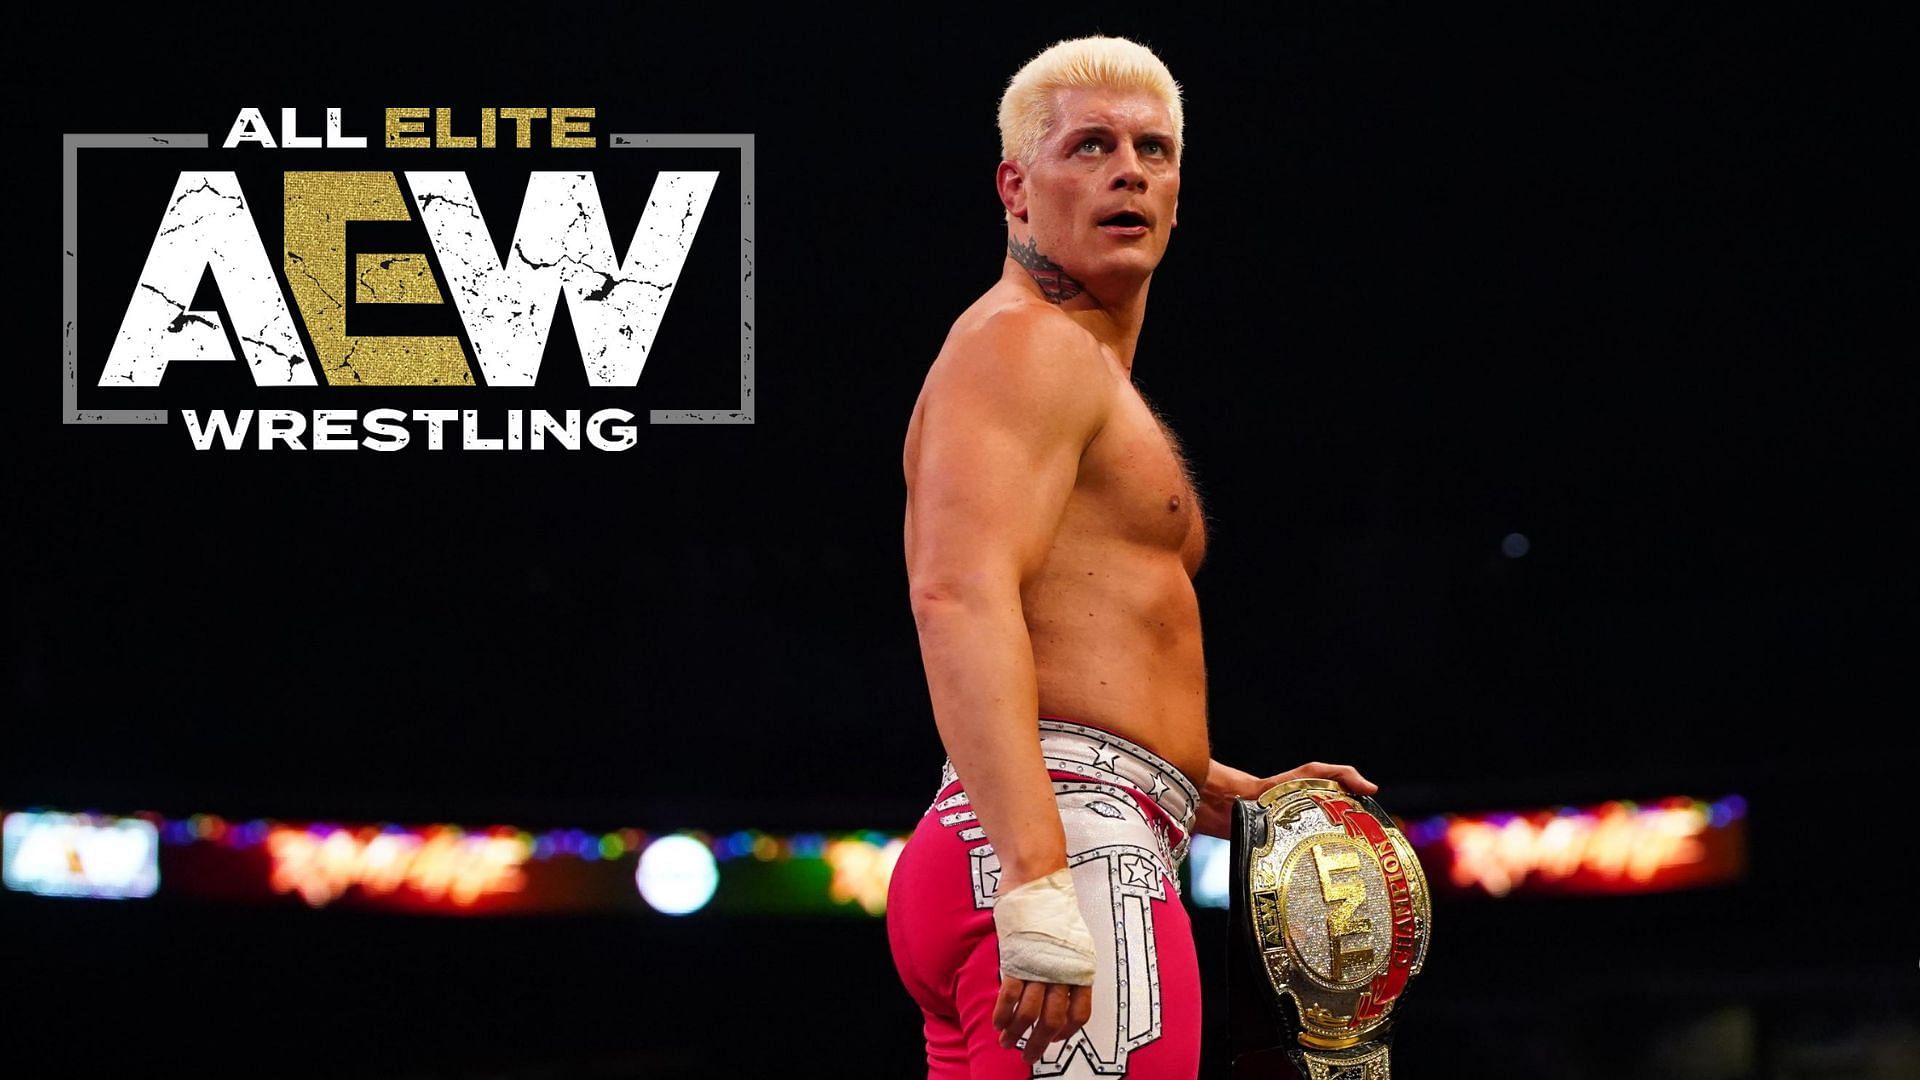 Could The American Nightmare return to AEW?